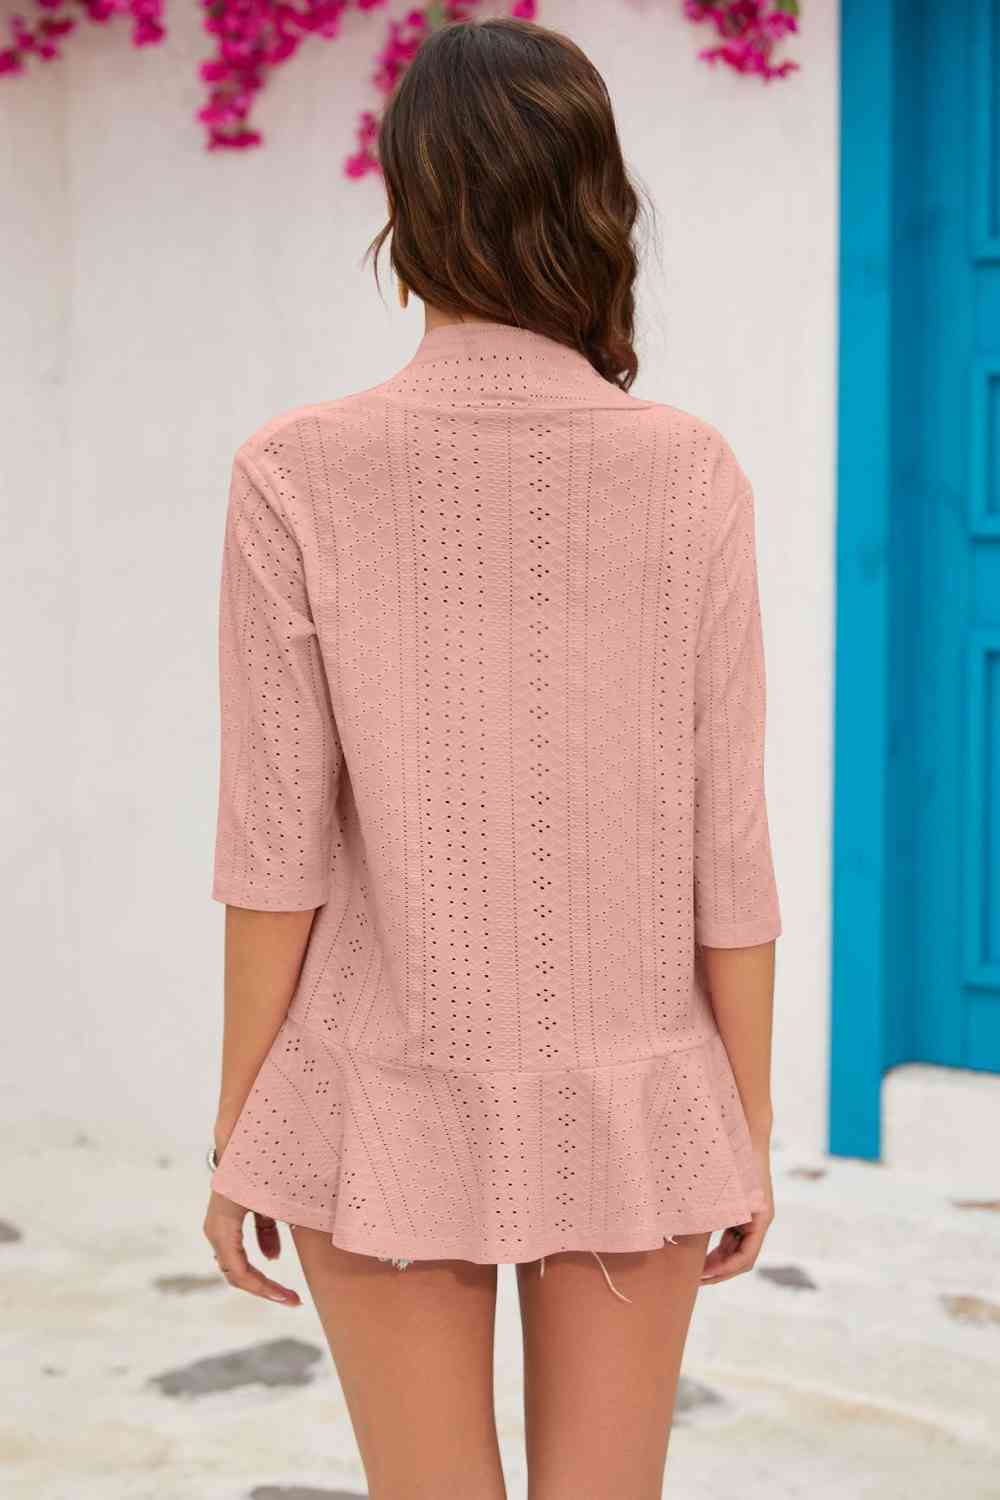 A Half Sleeve Open Front Cardigan